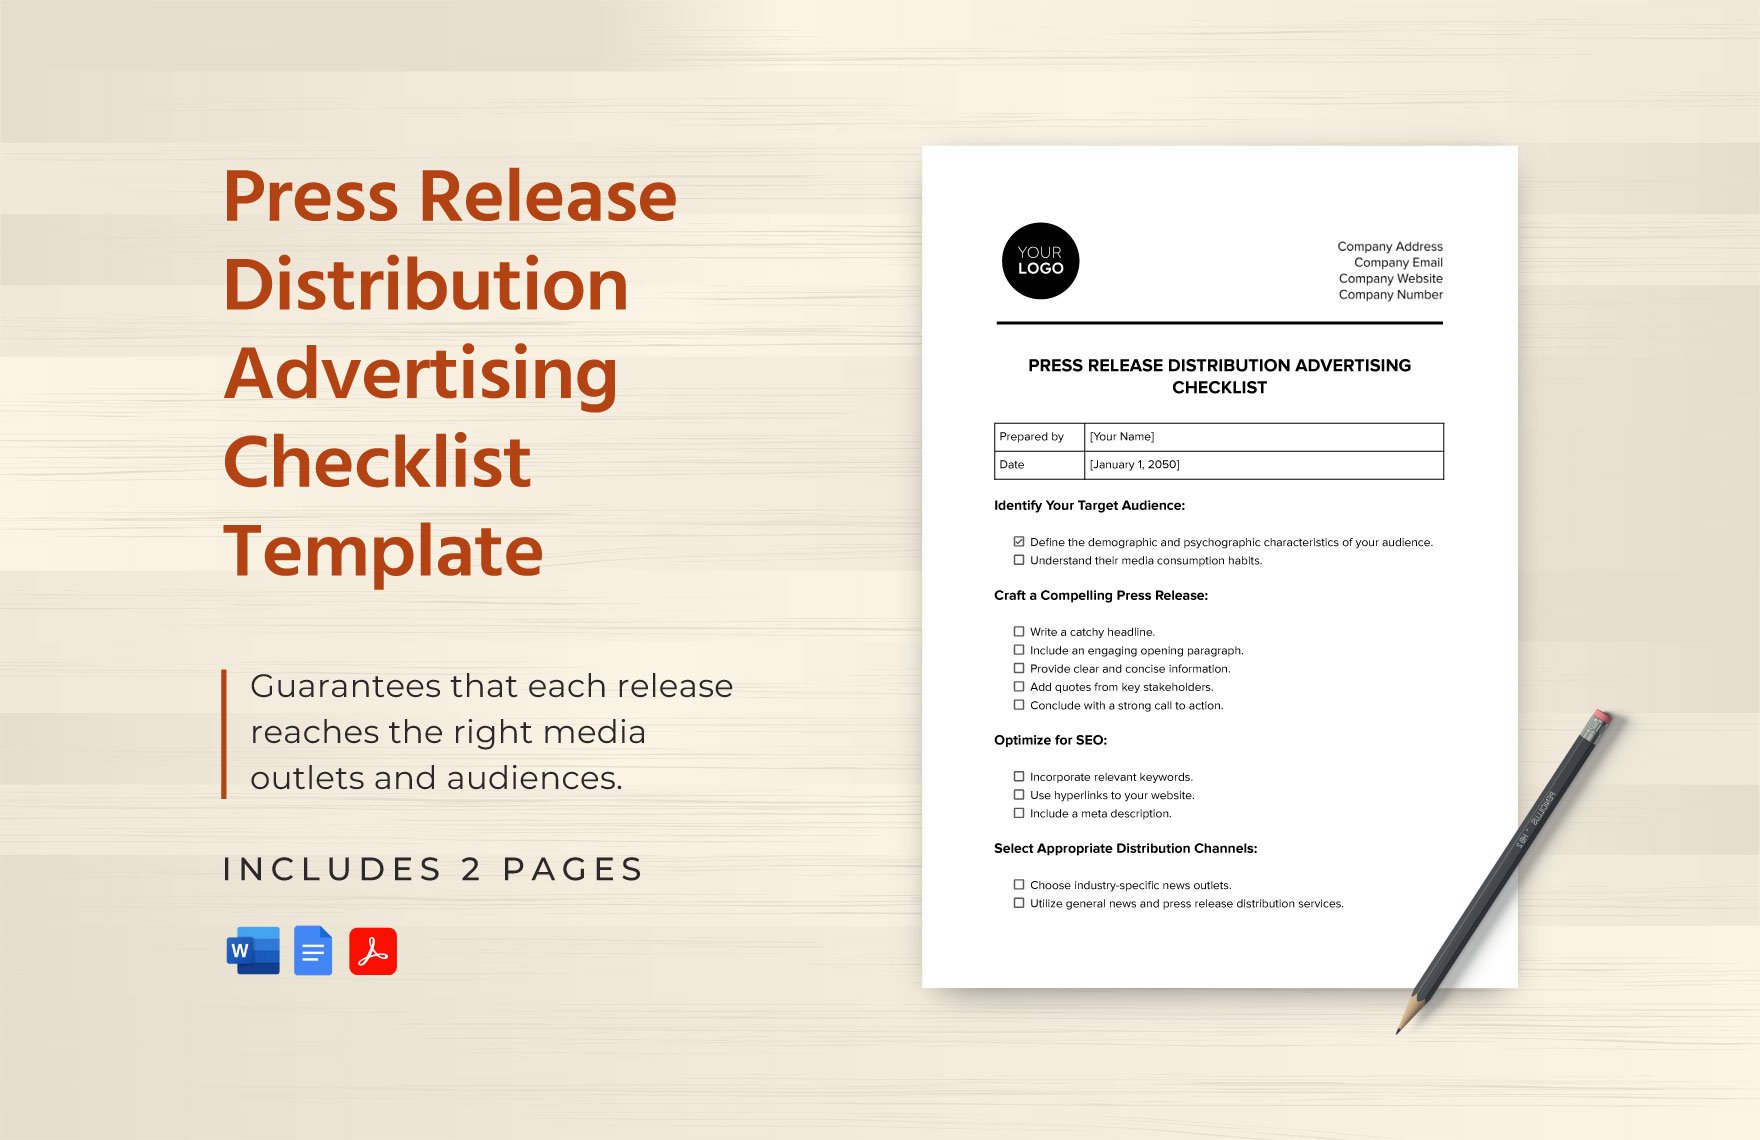 Press Release Distribution Advertising Checklist Template in Word, Google Docs, PDF